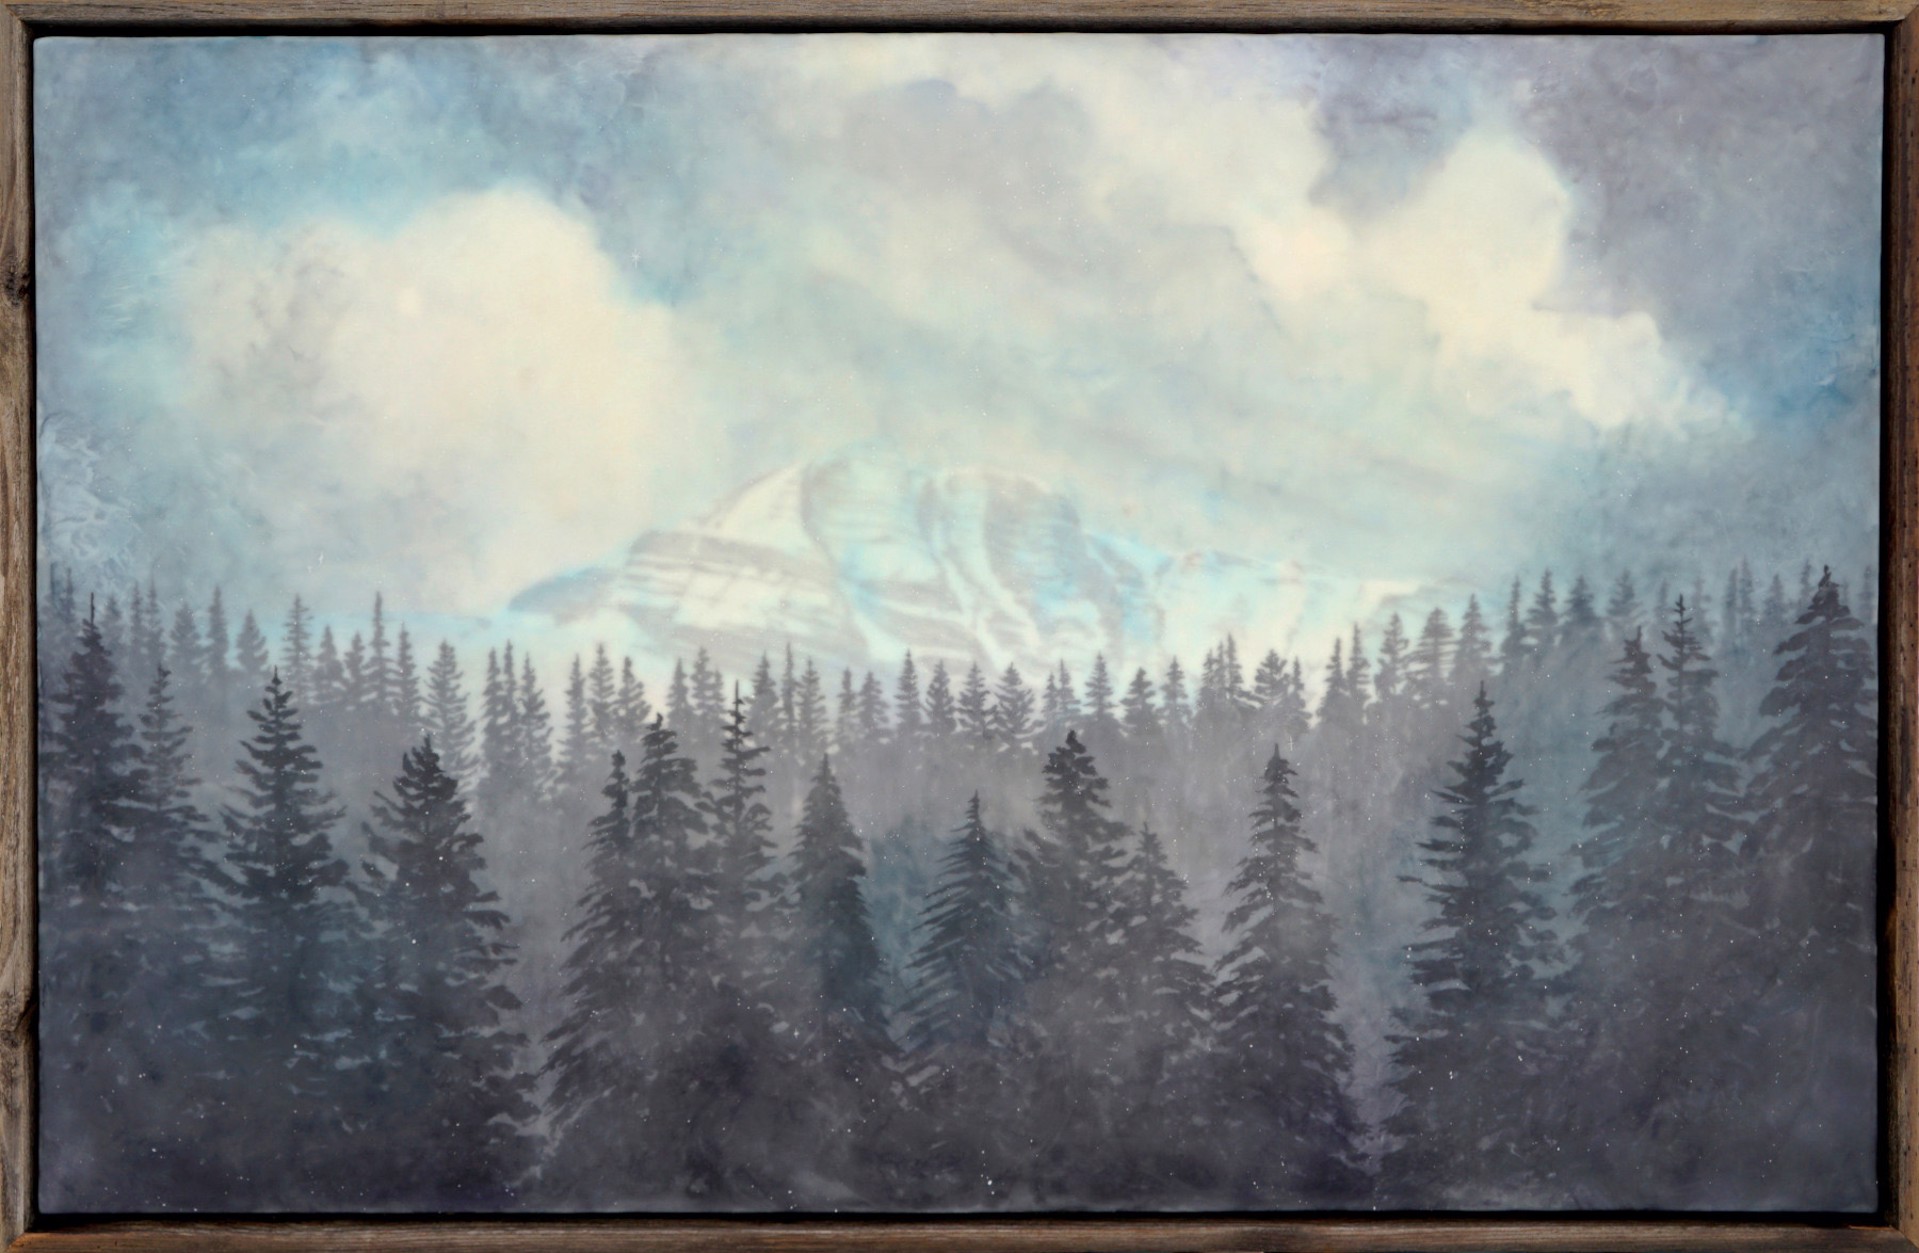 An Original Encaustic And Milk Paint Painting Of Rendezvous Mountain On A Moody Misty Day With Layered Depth Of Trees In The Foreground, By Bridgette Meinhold